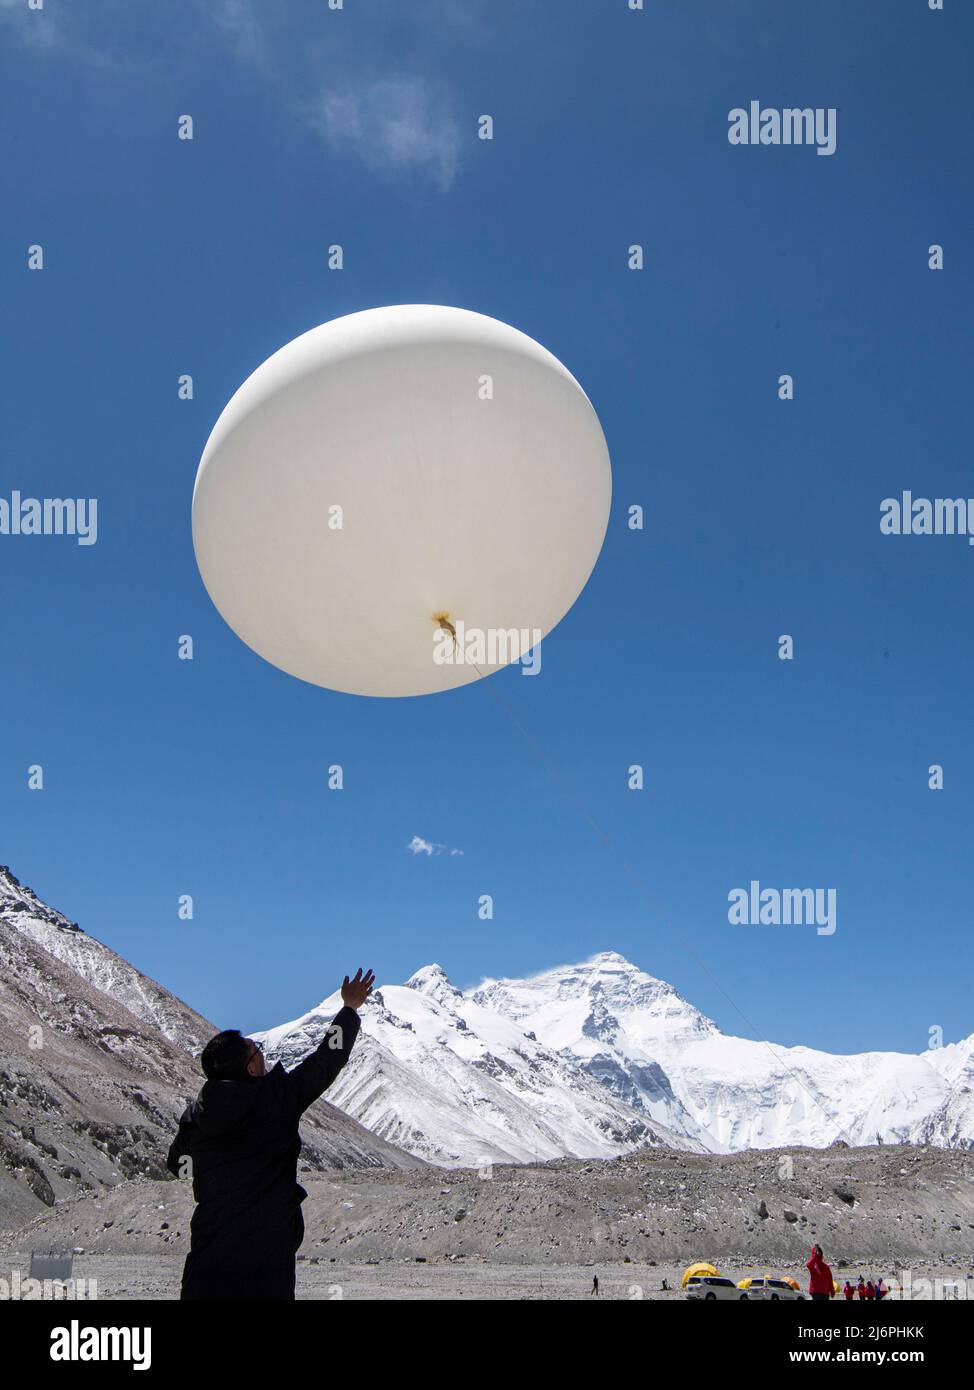 MOUNT QOMOLANGMA BASE CAMP, May 3, 2022 (Xinhua) -- A scientific research member launches a weather balloon at the Mount Qomolangma base camp on May 3, 2022.  China has started a new comprehensive scientific expedition on Mount Qomolangma, the world's highest peak on the China-Nepal border.   Weather factors such as temperature, wind speed and humidity will directly affect the completion of scientific research tasks and the safety of research personnel at high altitude. Therefore, a meteorological support team has been launched in safeguards of the scientific expedition.   The team Stock Photo